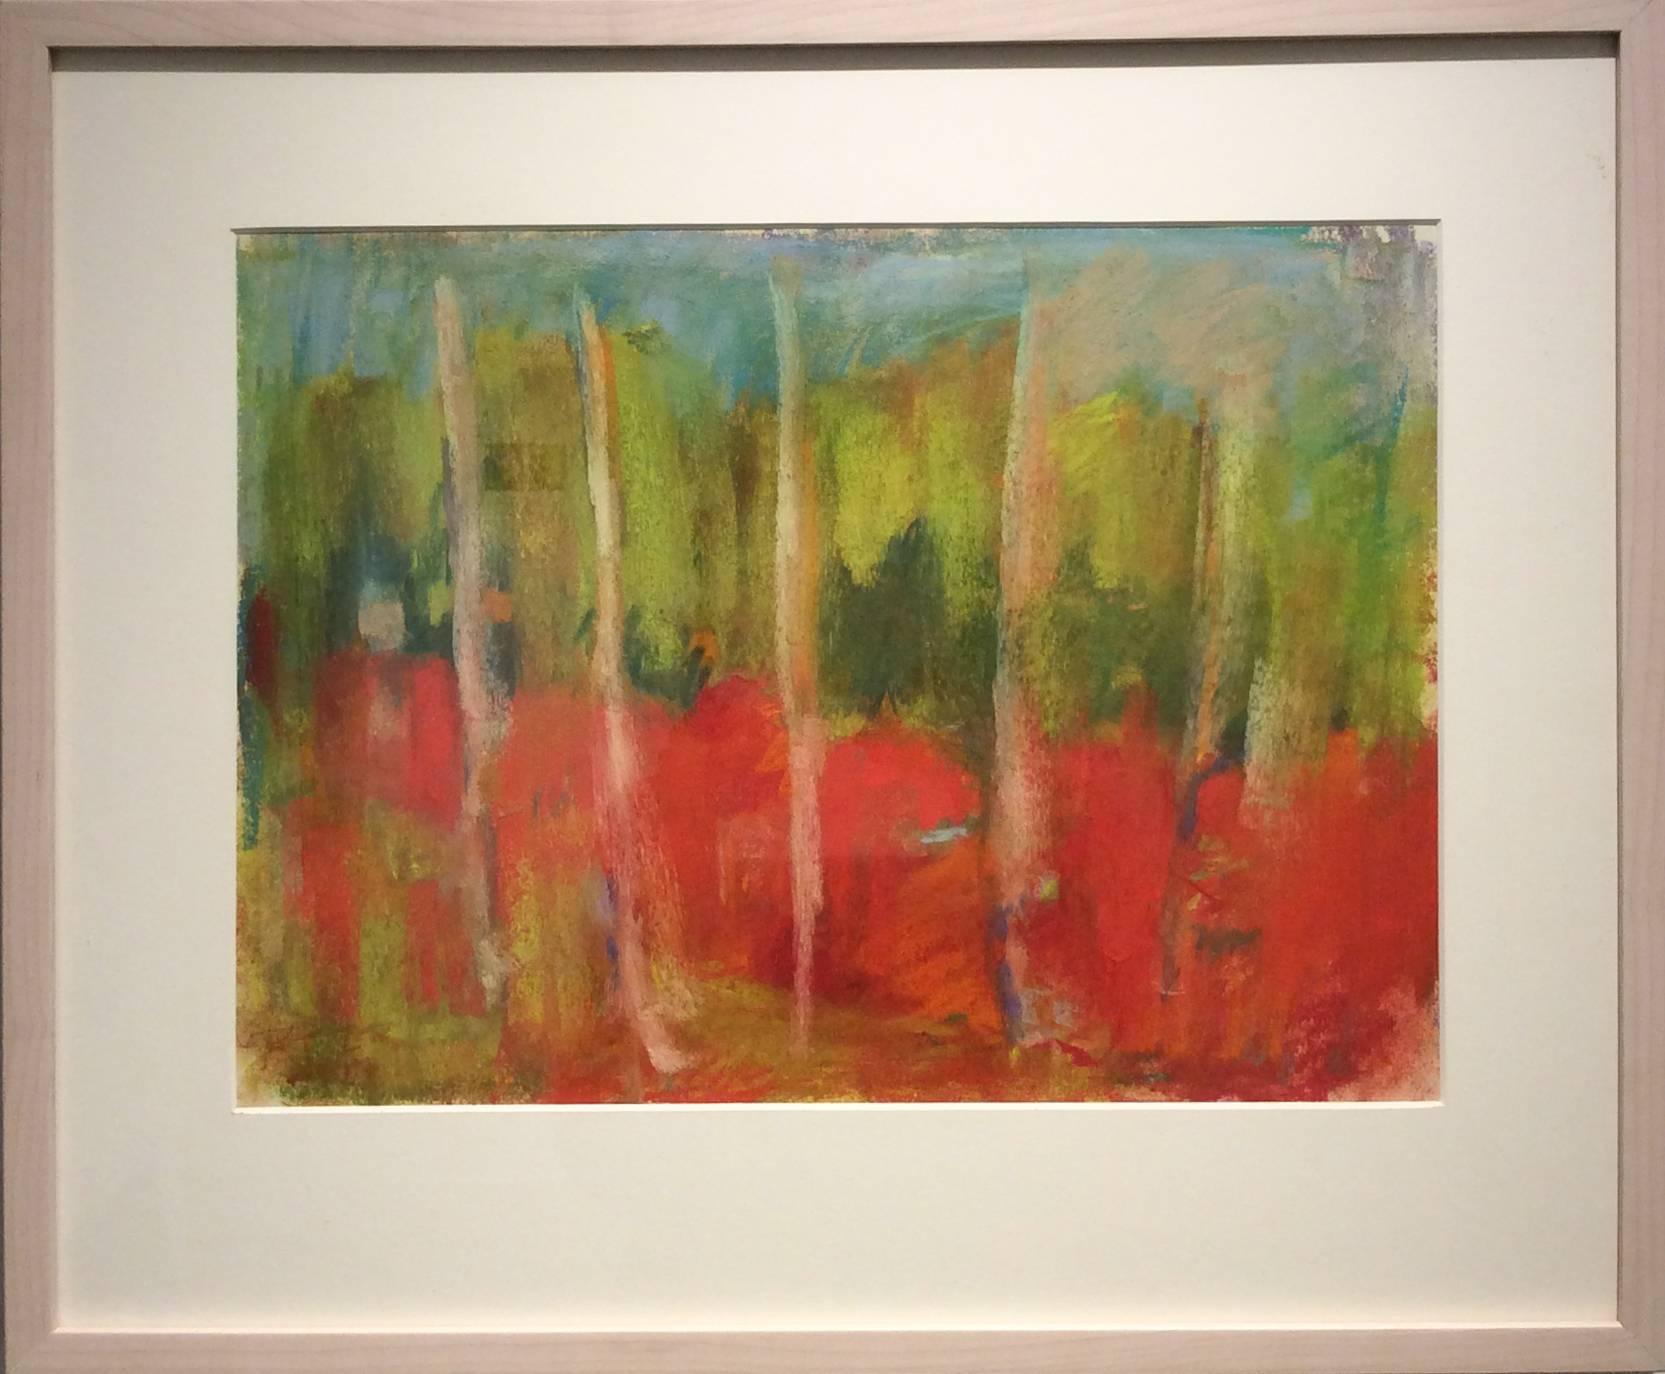 Wood Glen (Ethereal Abstracted Landscape Pastel on Paper) - Art by Nancy Rutter